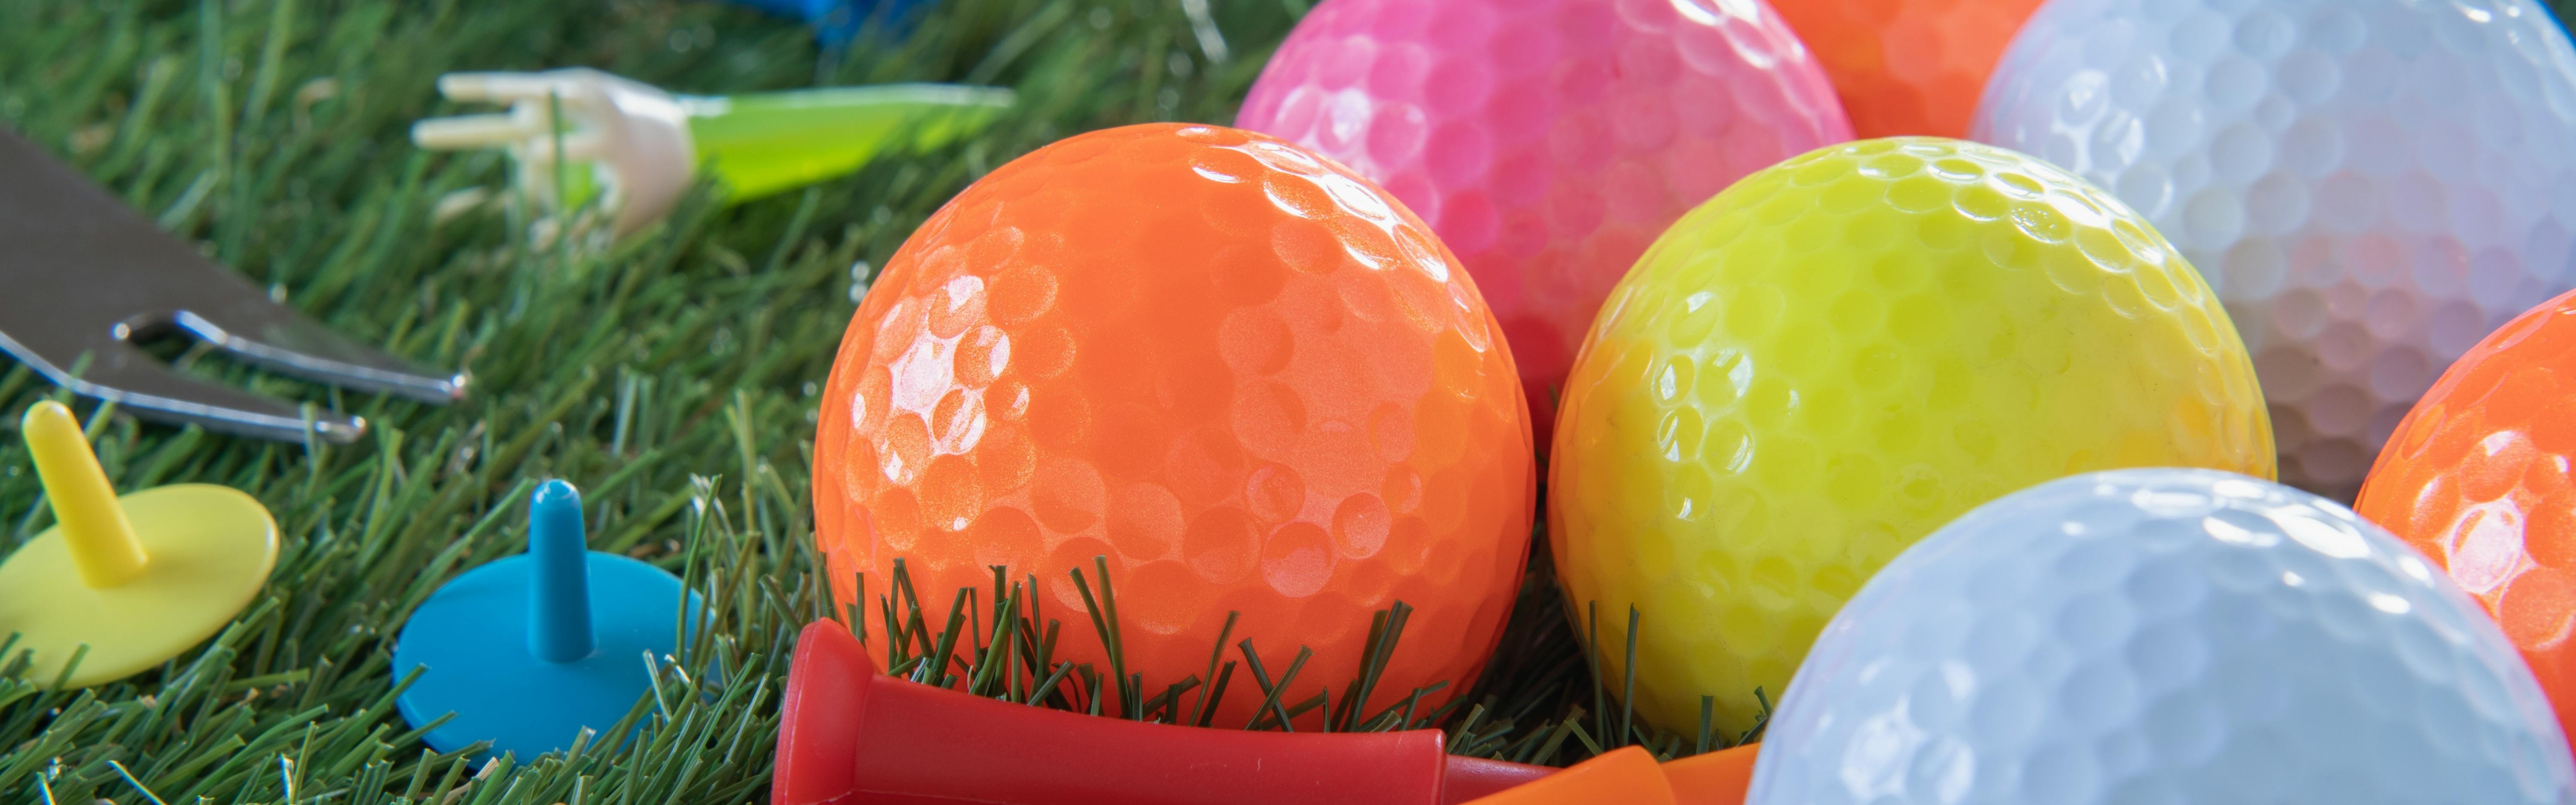 3 different ways to tee up the golf ball: Which one is best for you?, How  To